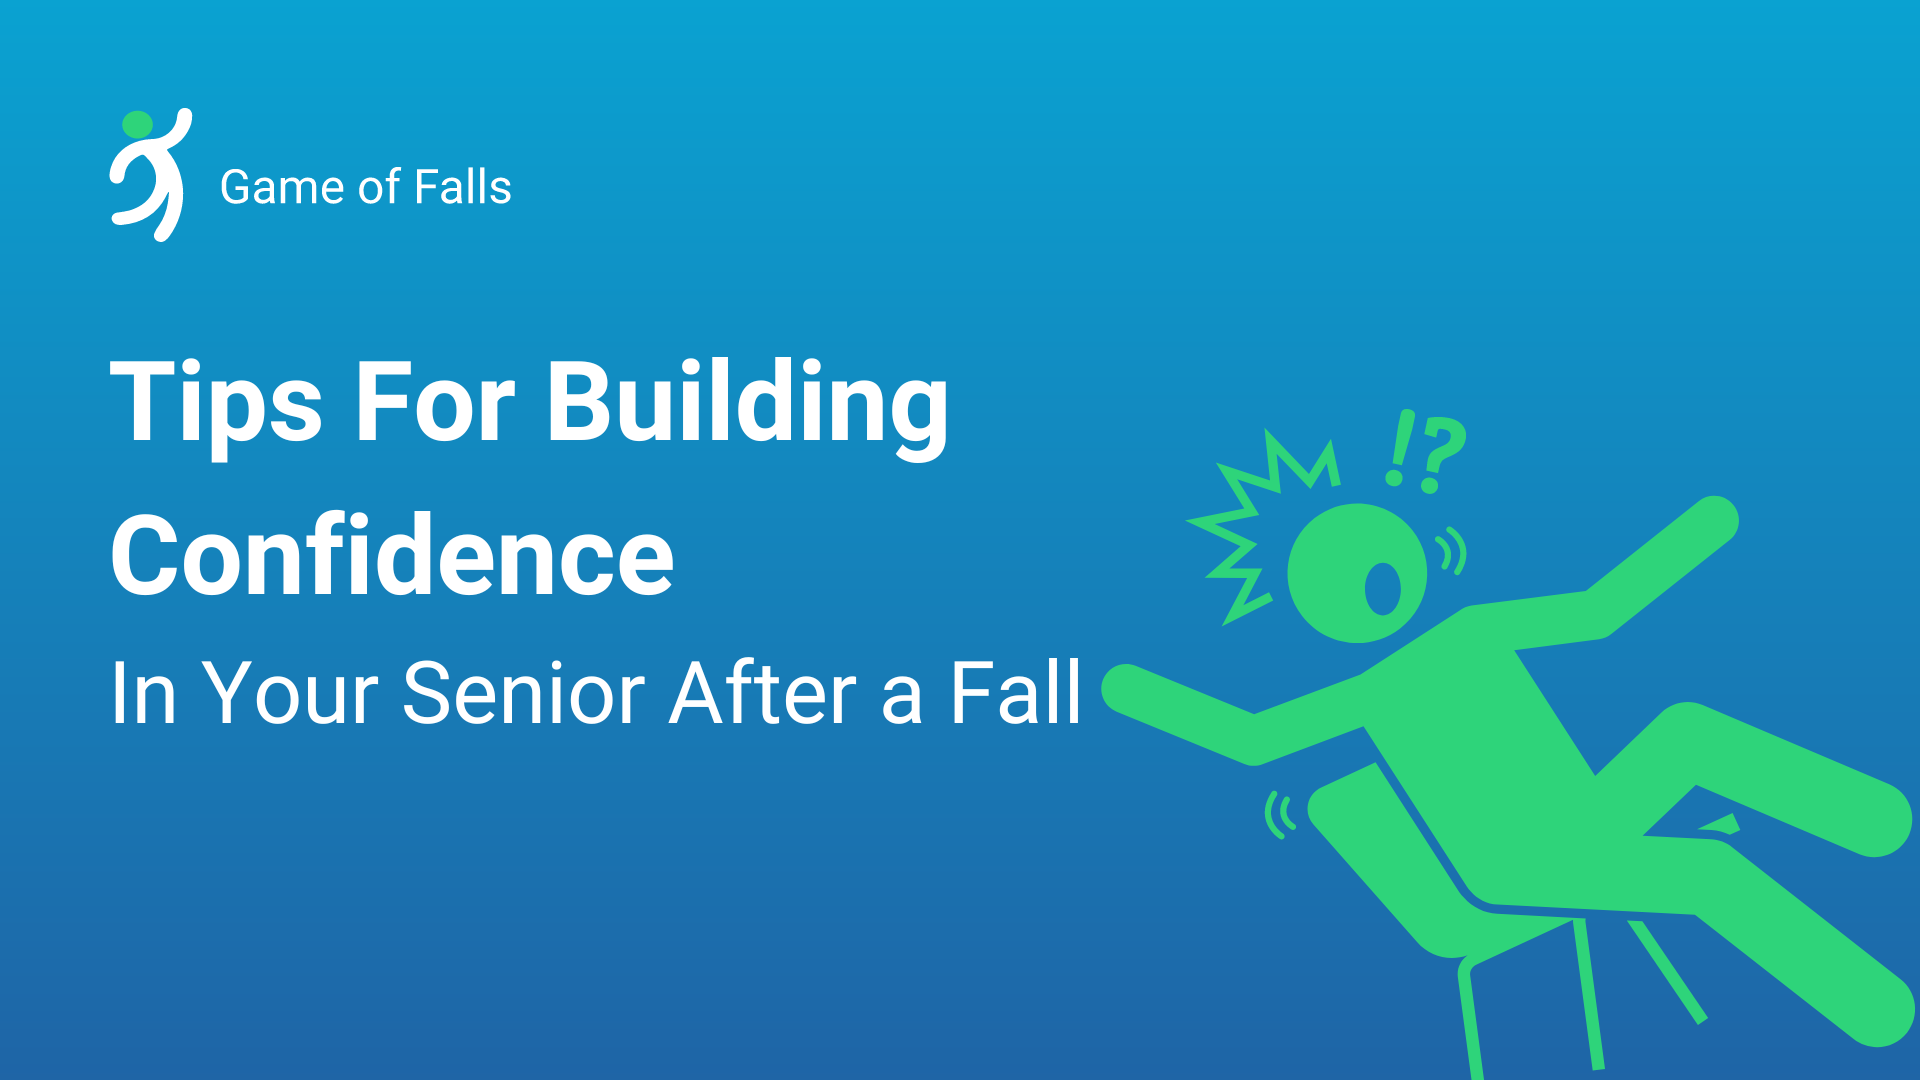 Tips for Building Confidence in Your Senior After a Fall